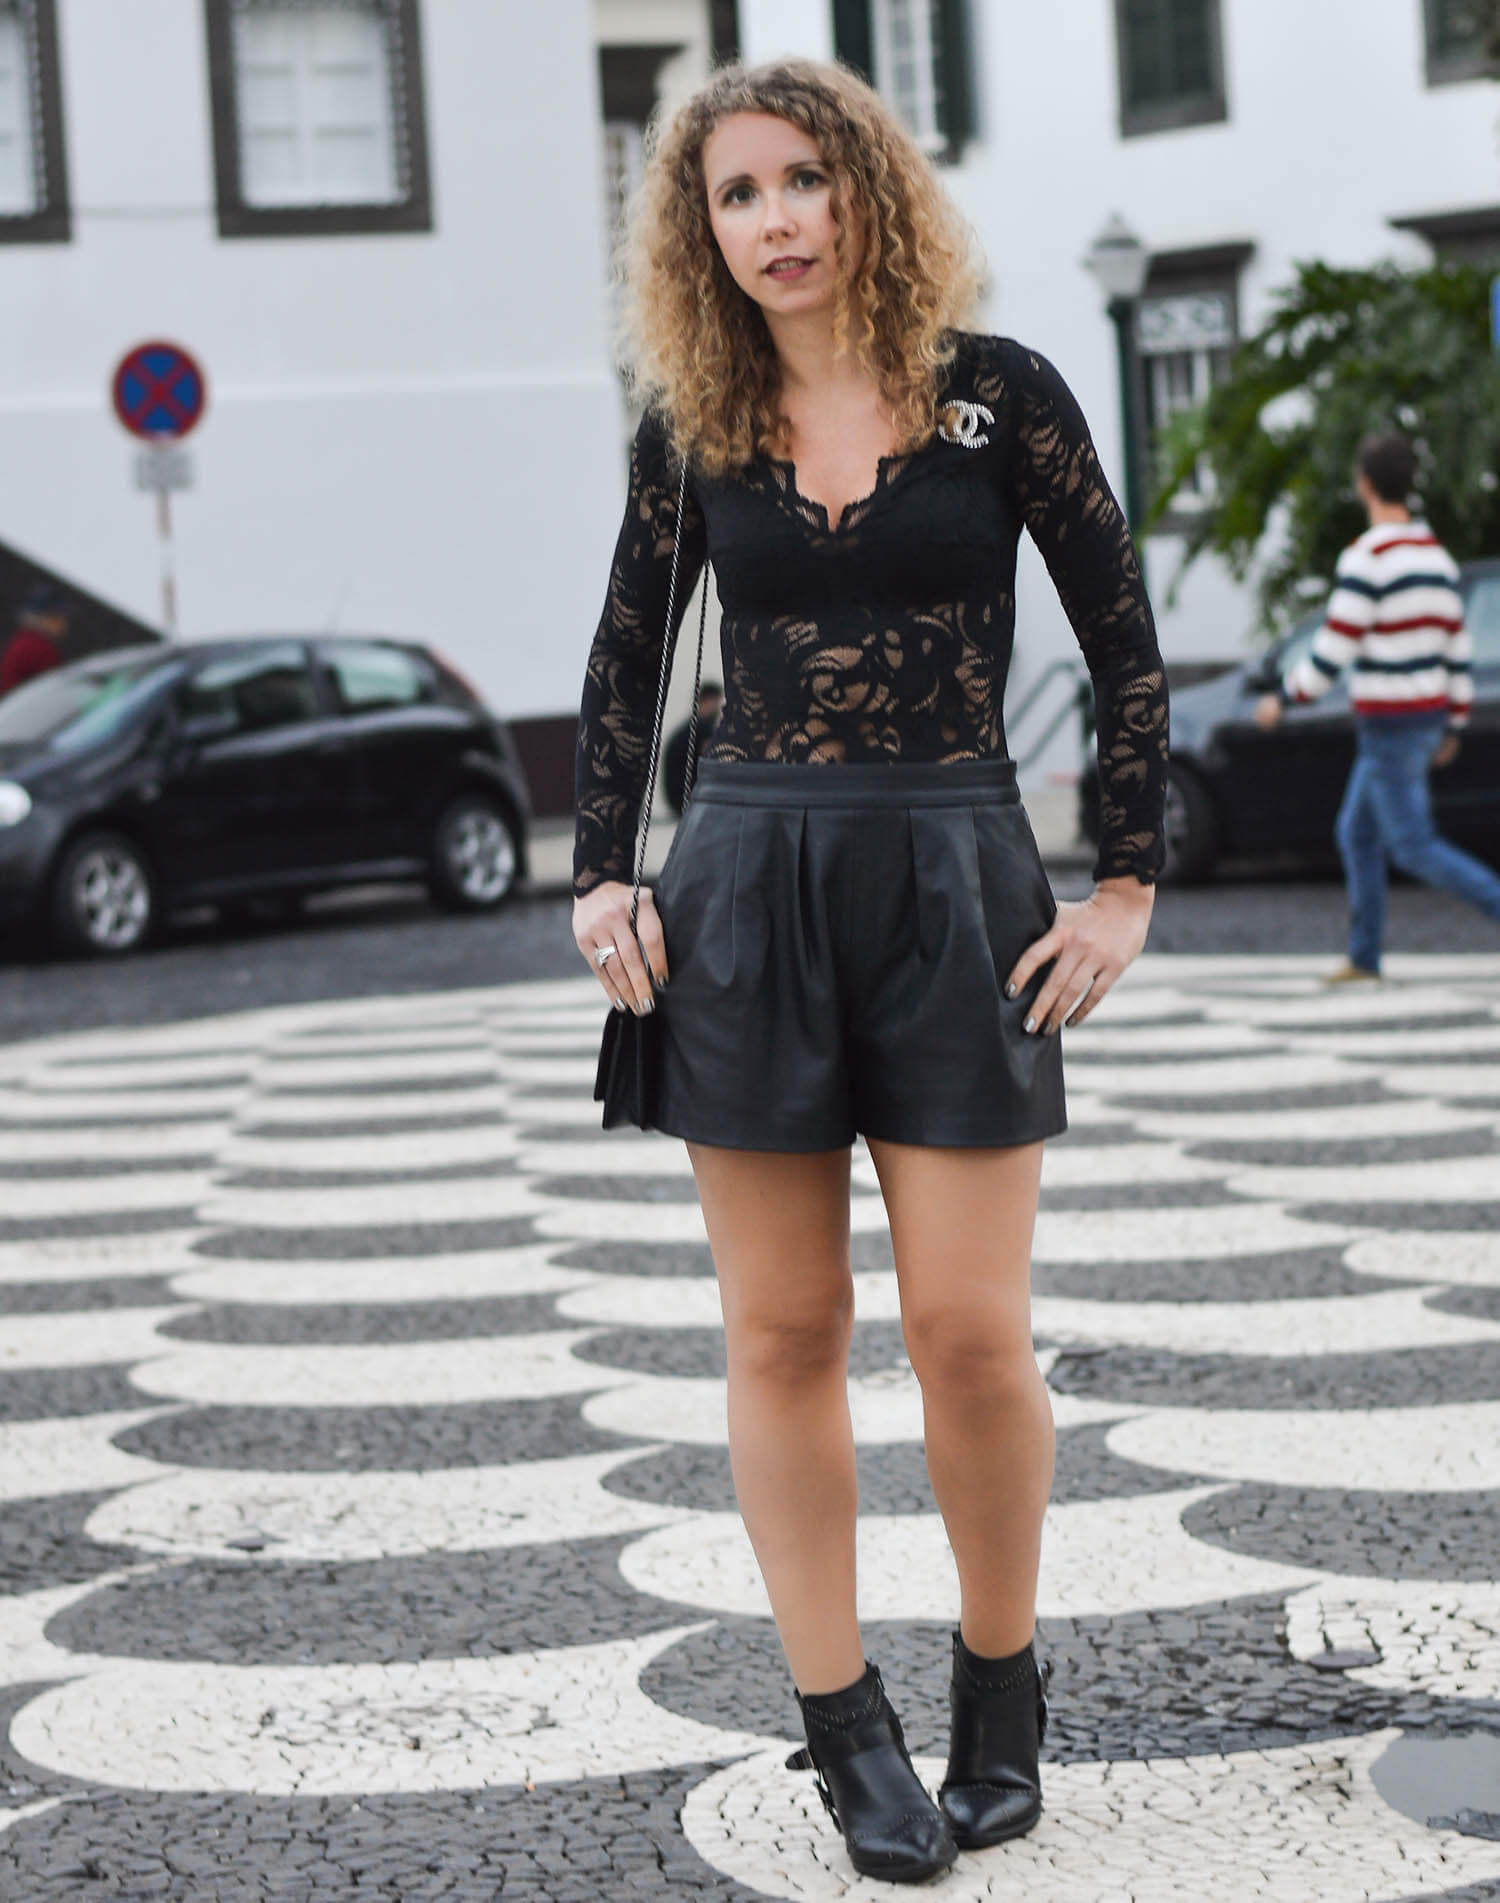 Kationette-fashionblogger-nrw-Outfit-Chanel-zara-Allblack--Lace-and-Leather-for-dinner-in-Funchal-Madeira-travelblogger